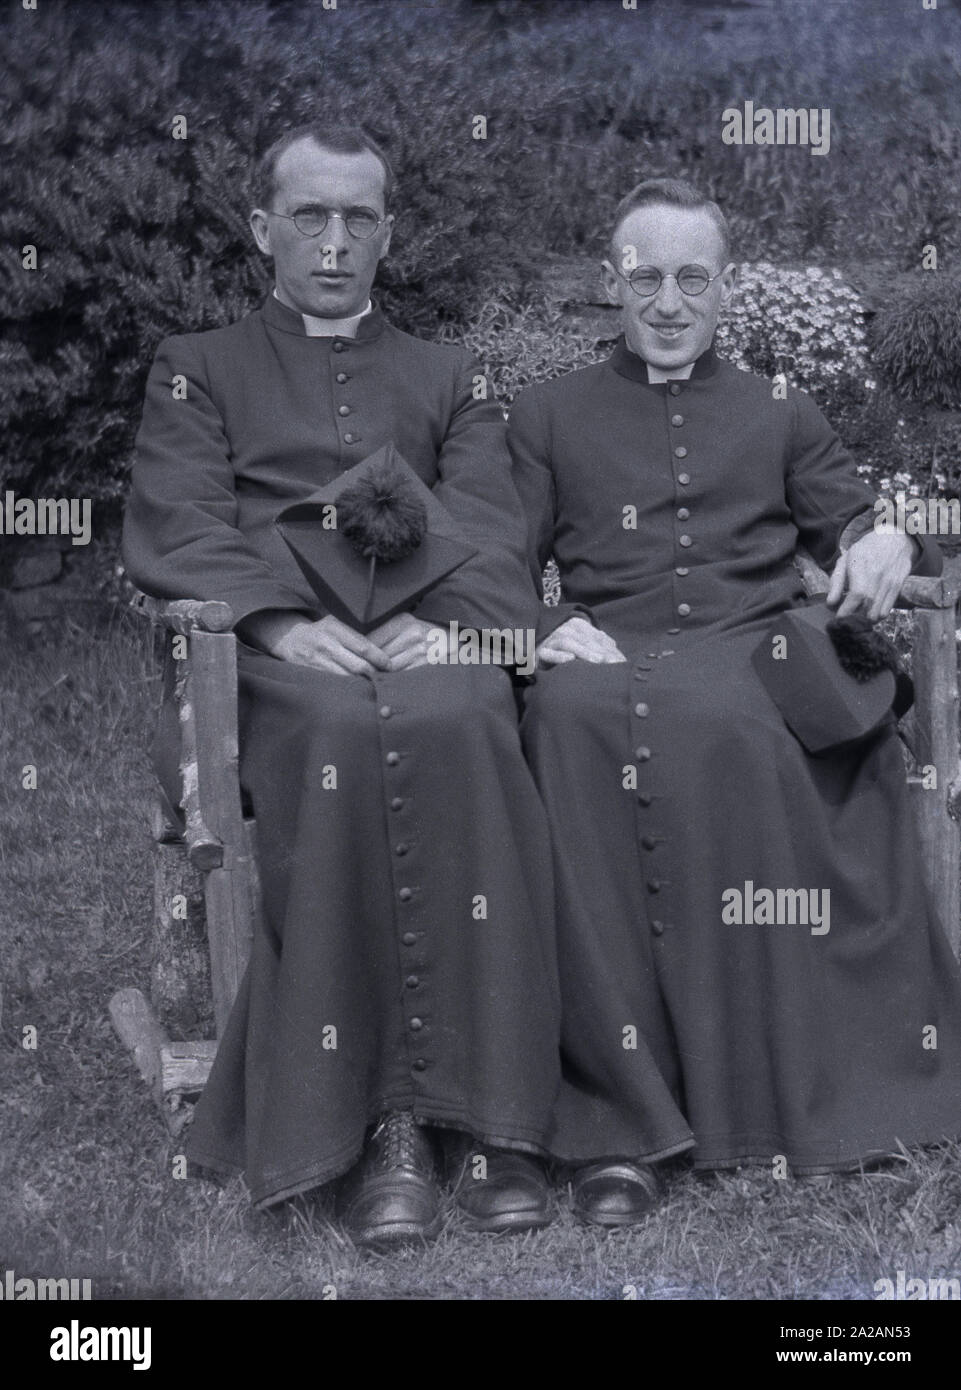 circa 1920s, historical, two Roman catholic priests sitting outside in their long robes on a small bench, holding their ecclesiastical hats, a biretta, a stiff square cape wth four ridges across the top, surmounted by a tuft, England, UK. The long button ankle-length gowns are known as cassocks and are a traditional christian clerical clothing coat. Stock Photo